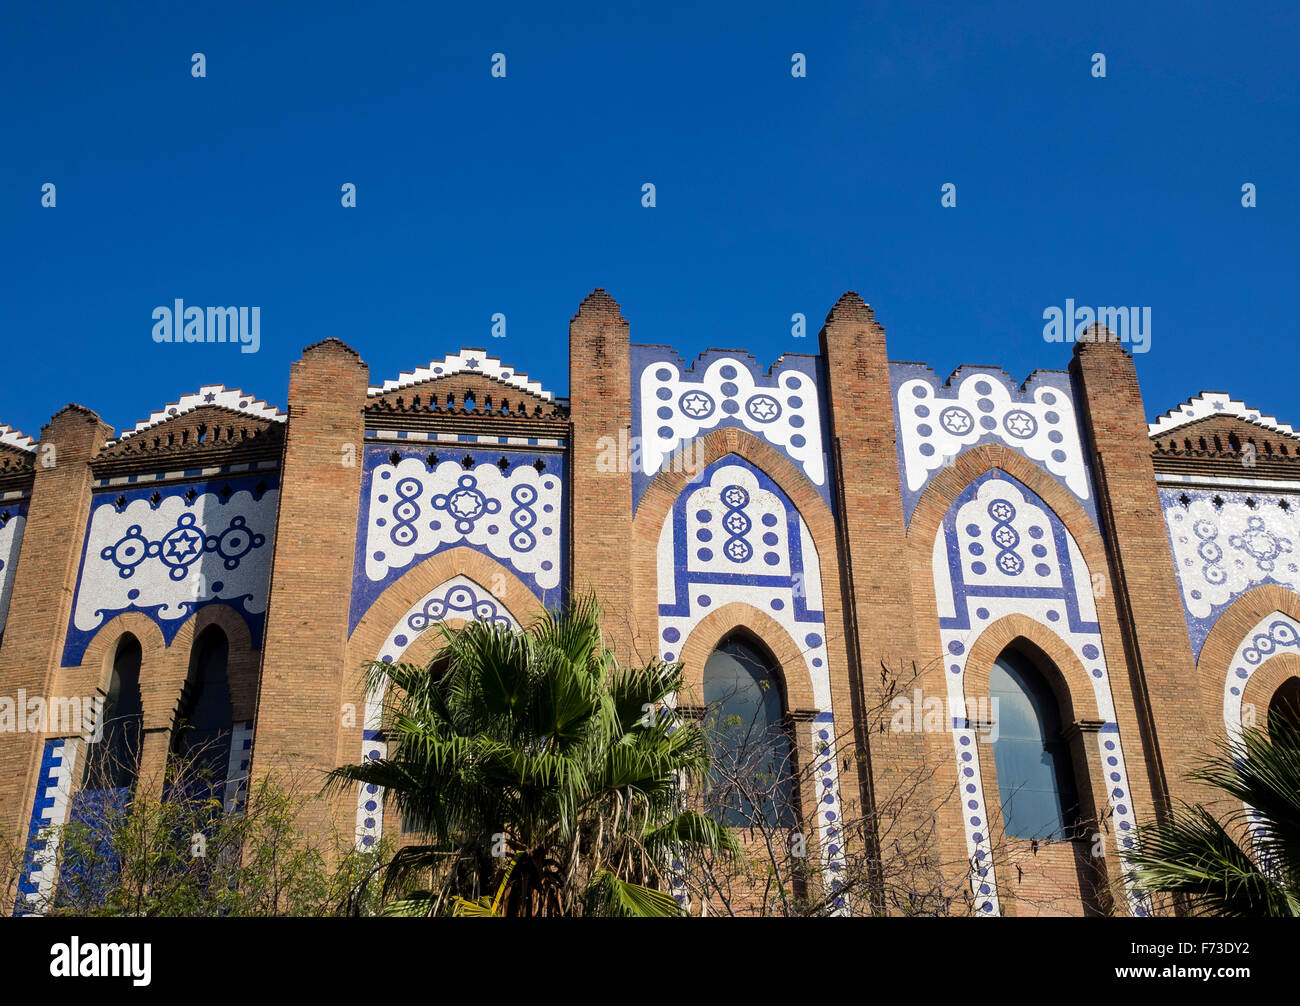 Exterior view of detail on the Plaza de Toros Monumental (Bullring) in Barcelona - Catalonia, Spain Stock Photo